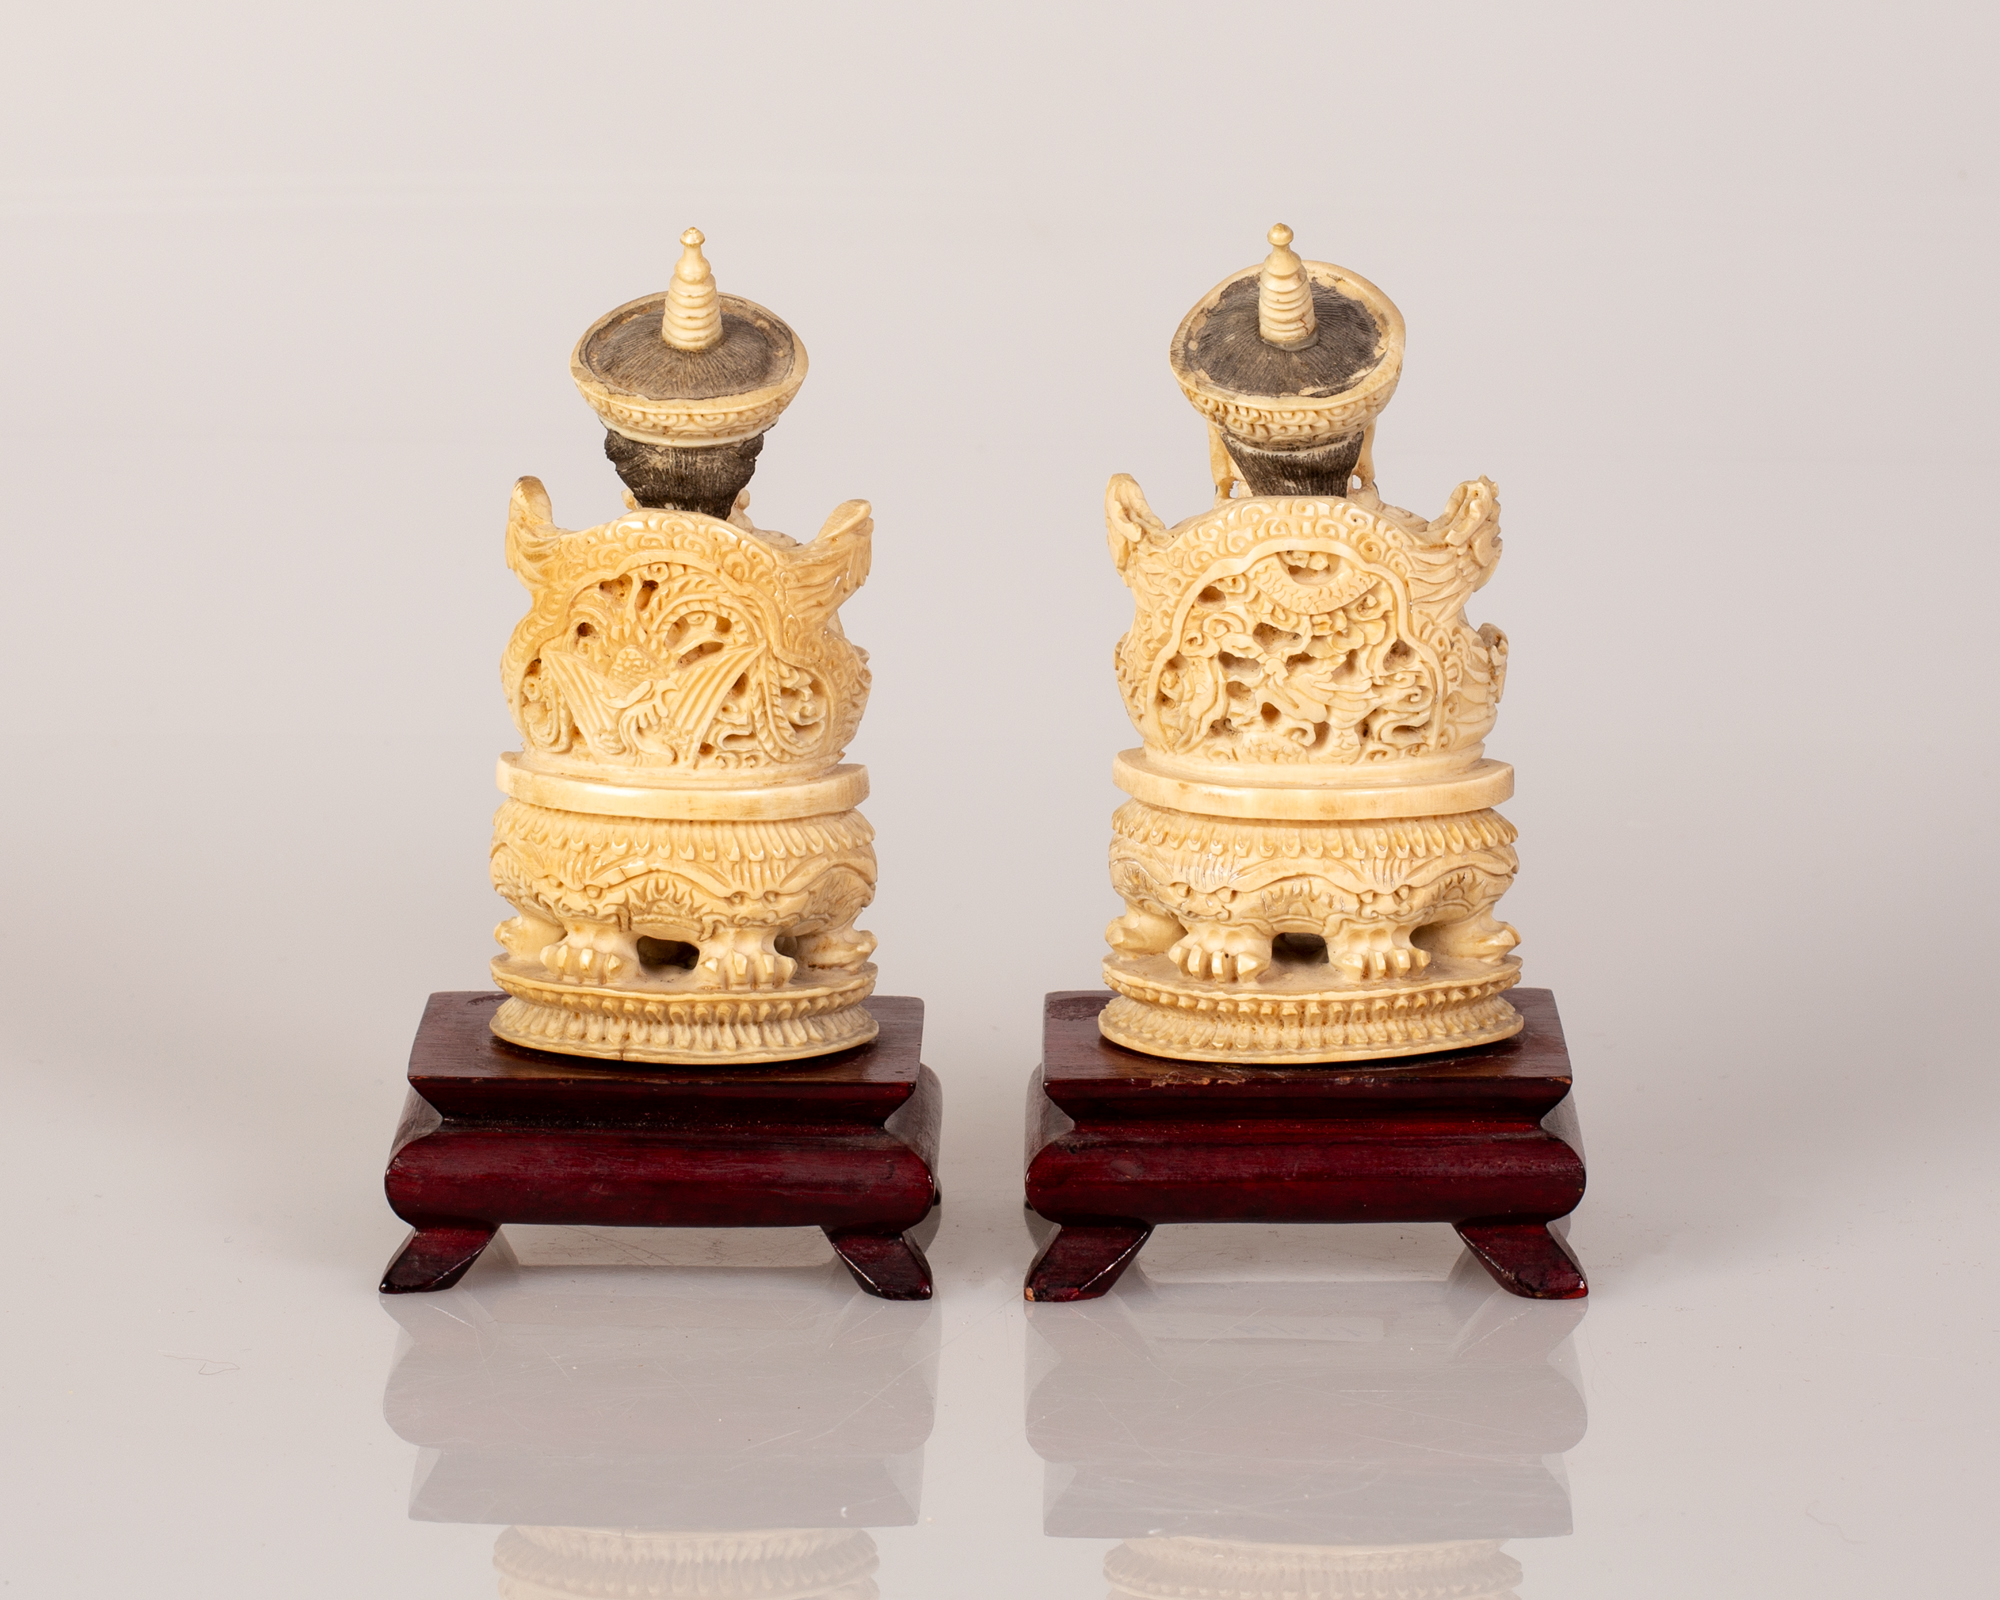 Pair of Old Chinese Bone Sculptures Emperor & Empress Figure on Wooden Stand - Image 2 of 3